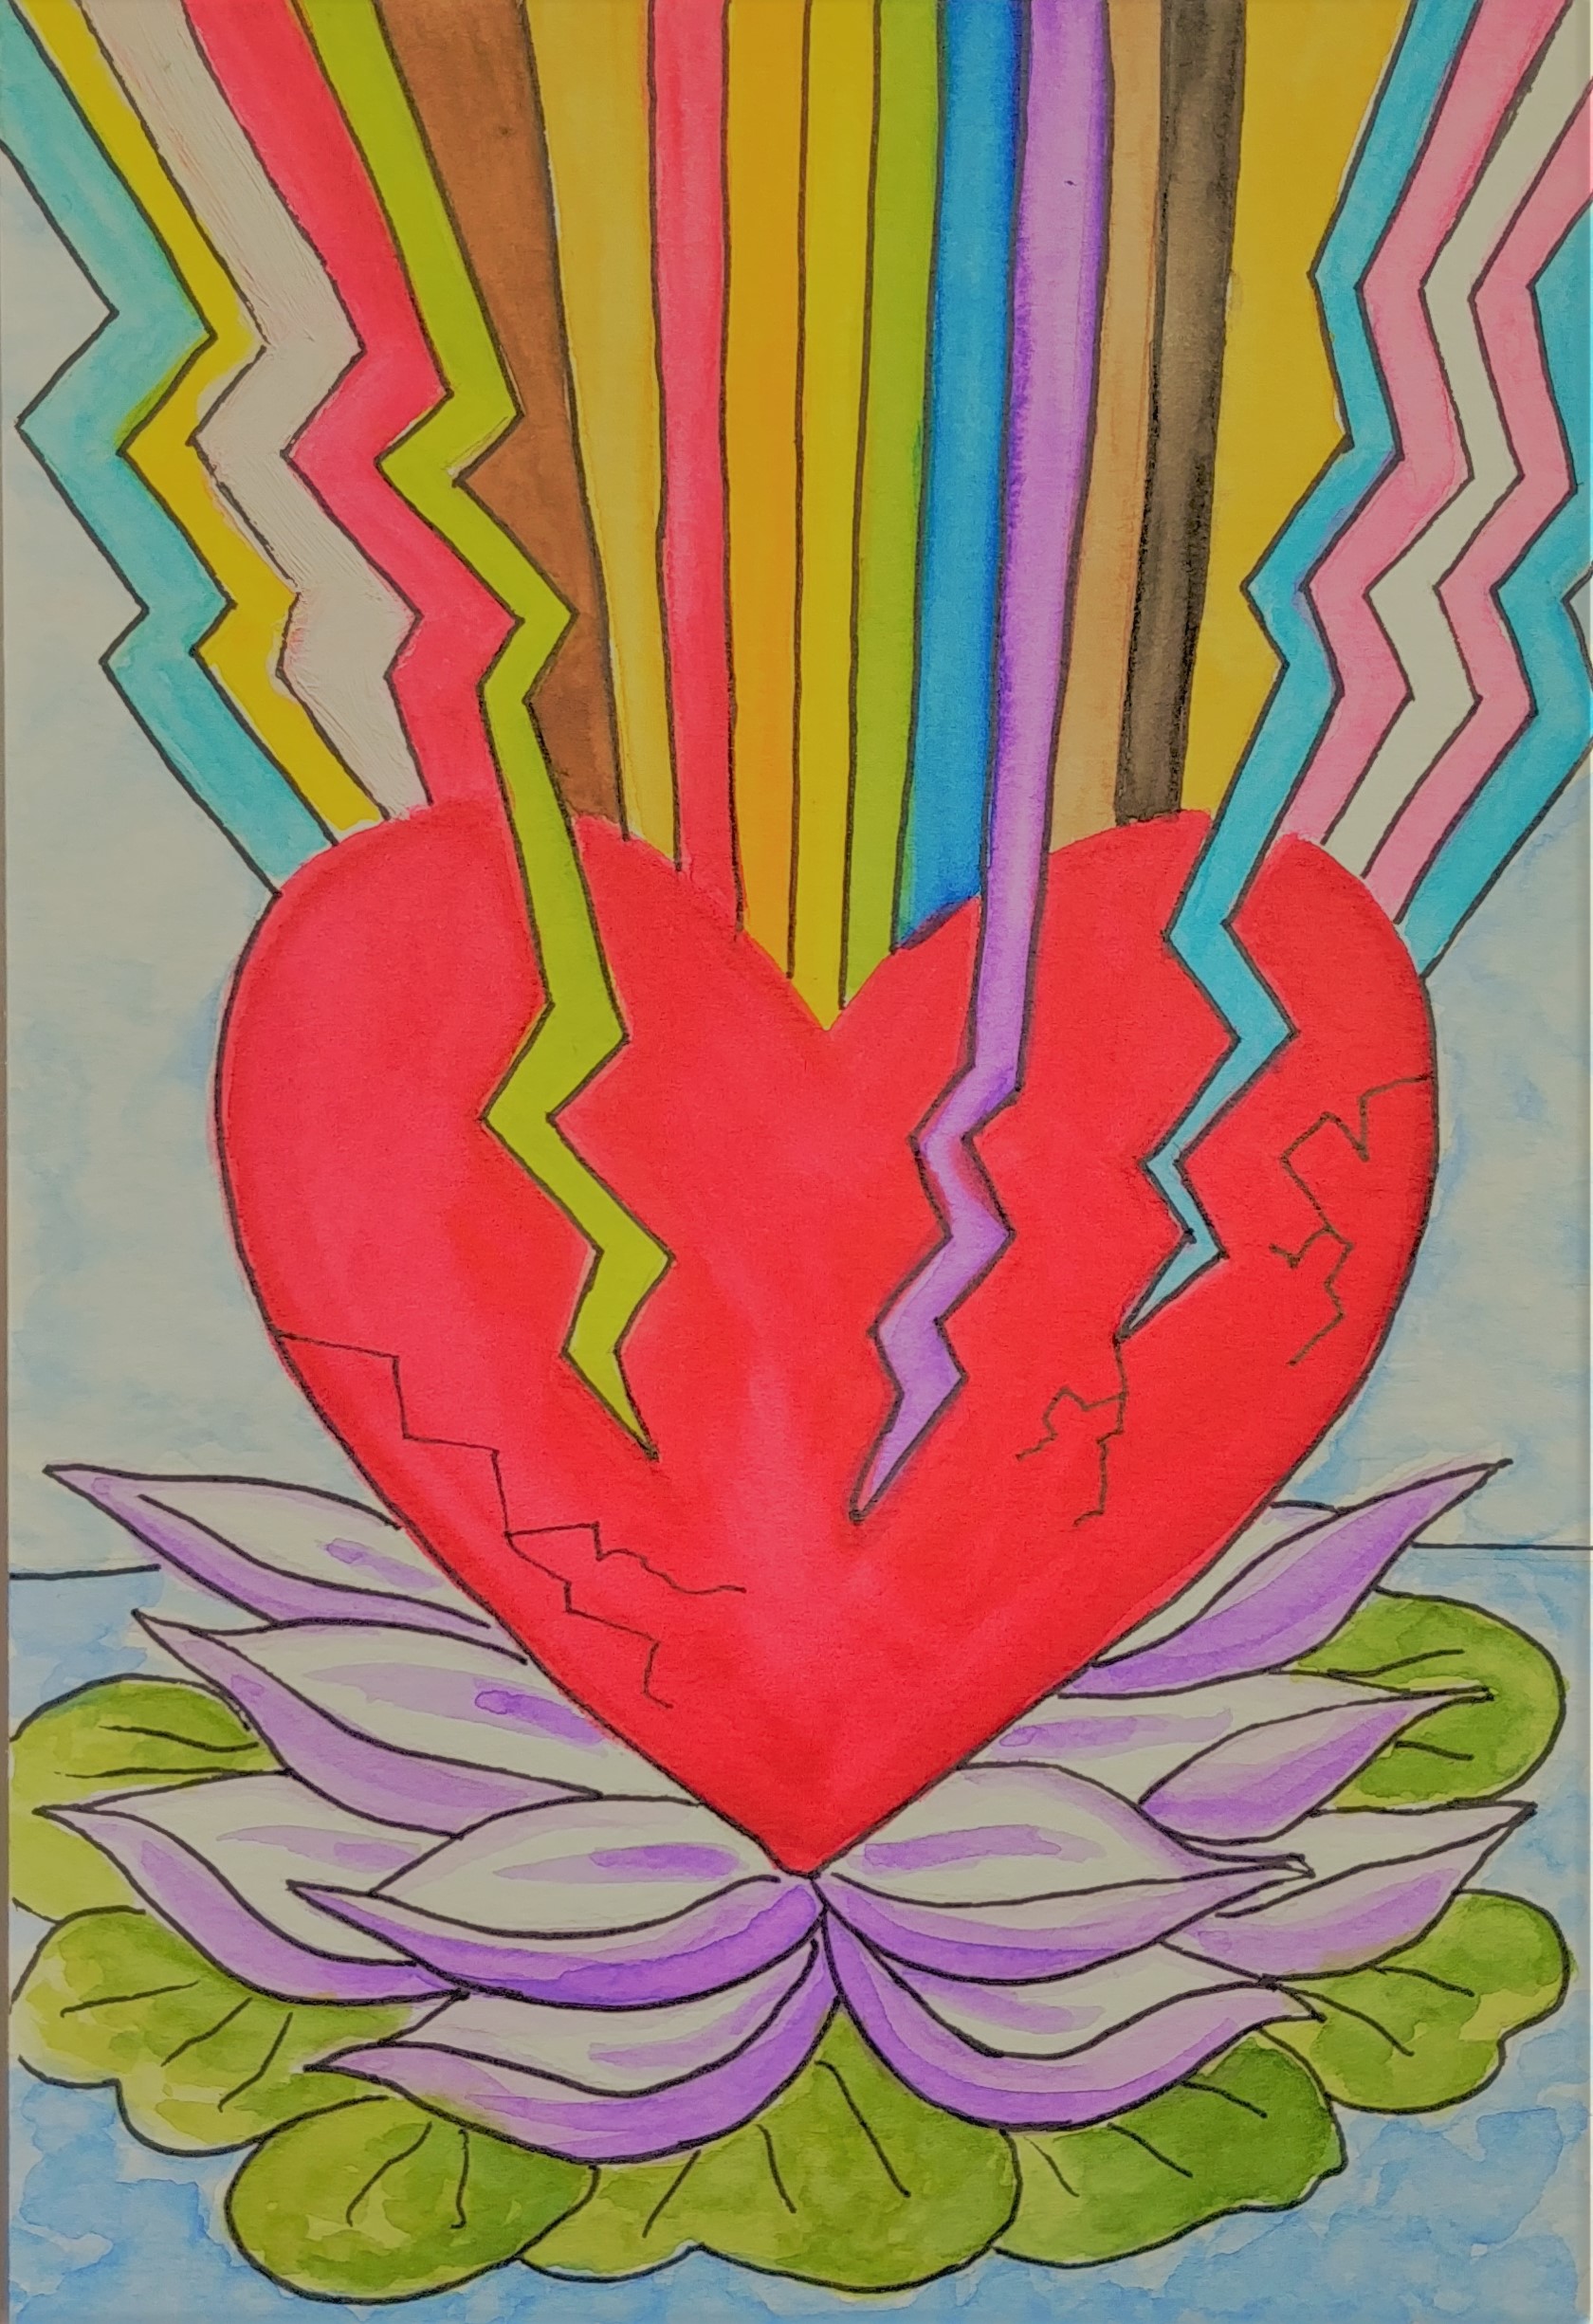 Watercolour painting of heart with cracks sitting atop a lotus flower. From the cracks of the heart are rainbow-coloured rays representing the disability pride flag, the pride flag, and the trans flag joined together and united by rays of blacks and browns
(Artist's Instagram @tumma.lumma